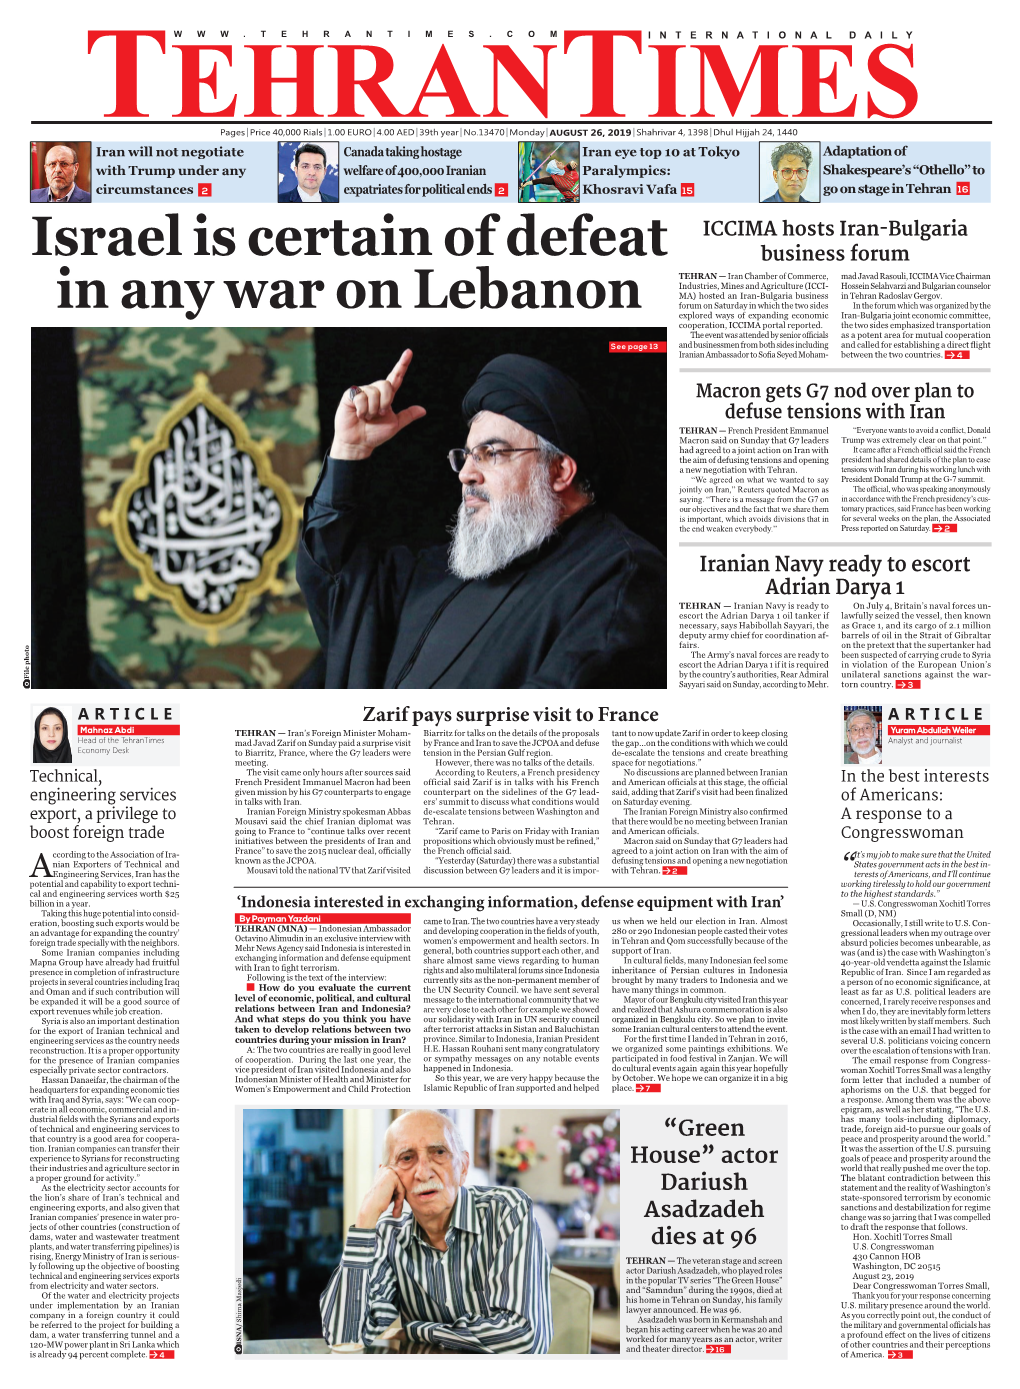 Israel Is Certain of Defeat in Any War on Lebanon: Nasrallah